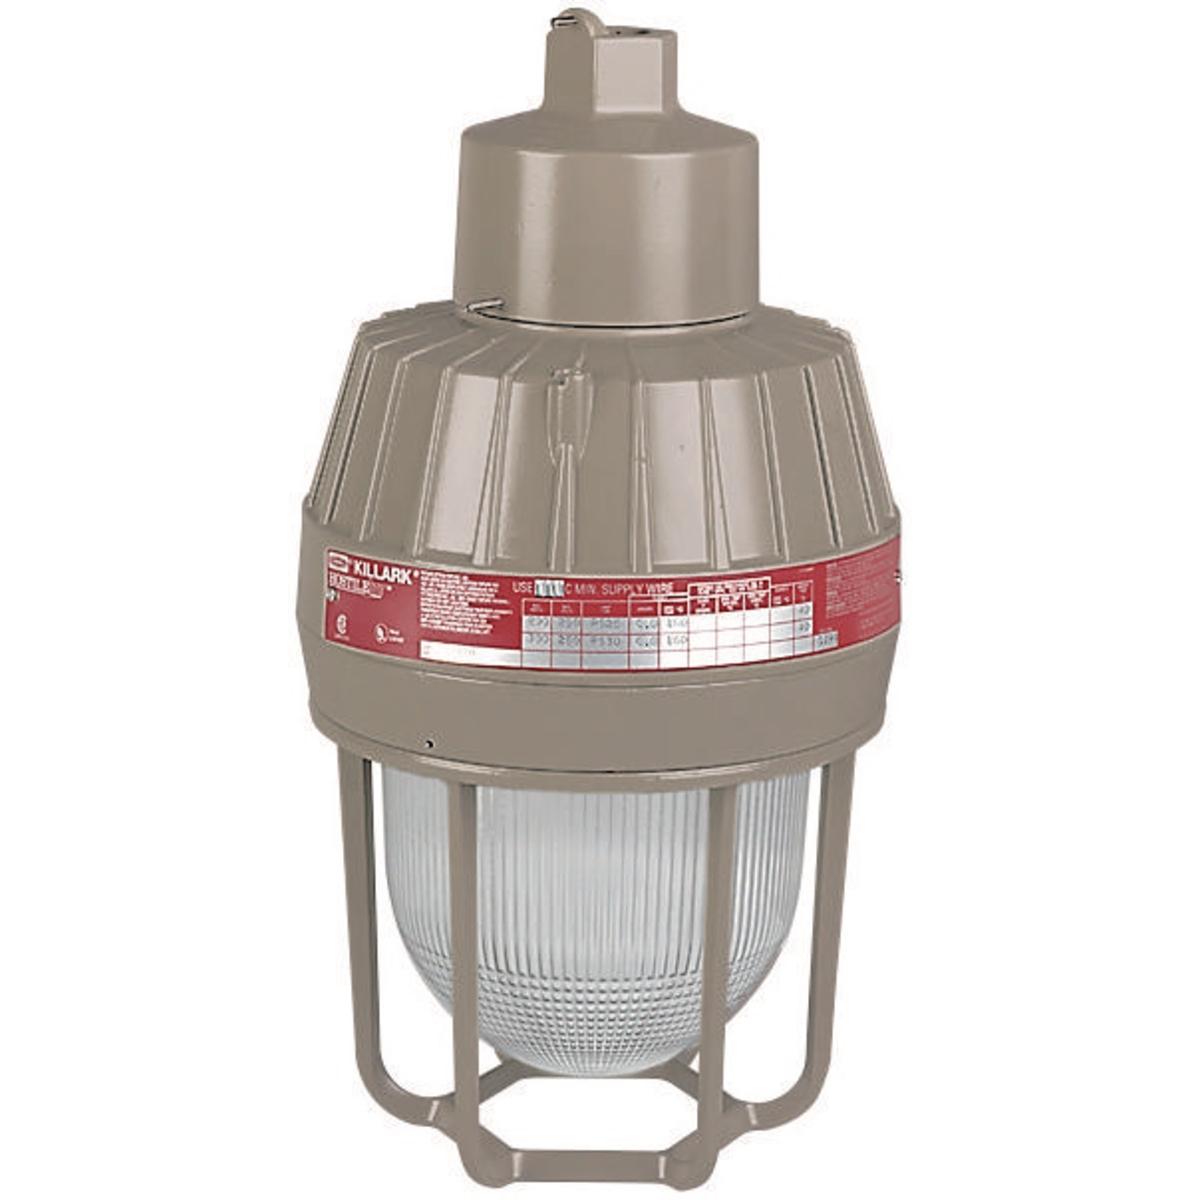 Hubbell EMS075A3G EM HPS 70W 480V 1" Pendant with Guard  ; Four light sources—Incandescent, compact fluorescent, high pressure sodium and metal halide ; Mounting choice—Pendant, ceiling, 25˚ stanchion or 90˚ wall mount, all with “wireless” design that allows fast, easy fix